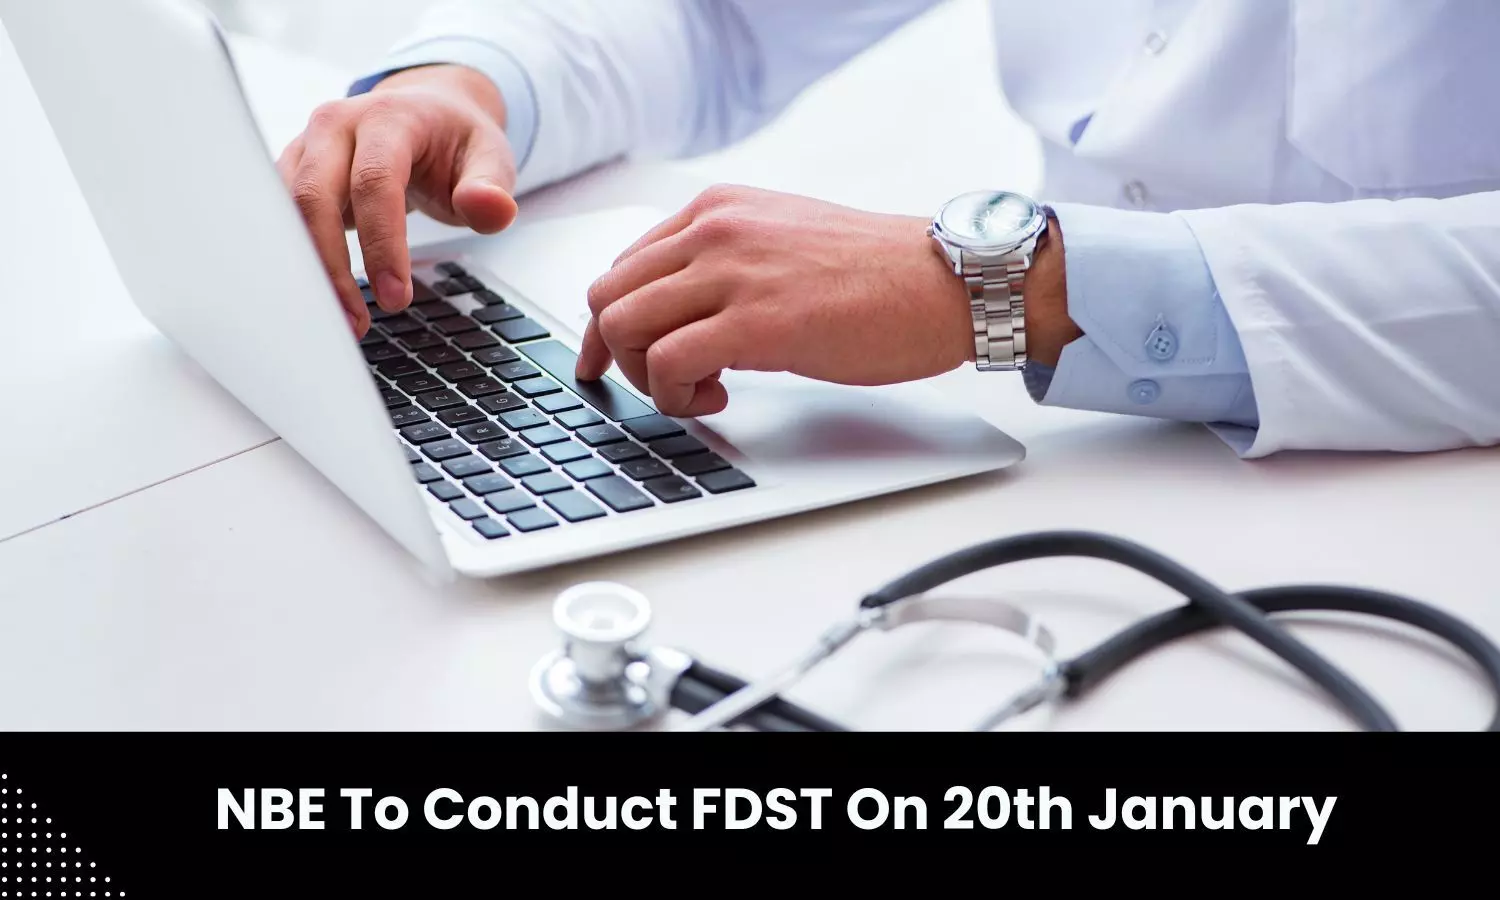 NBE to conduct FDST on 20th January